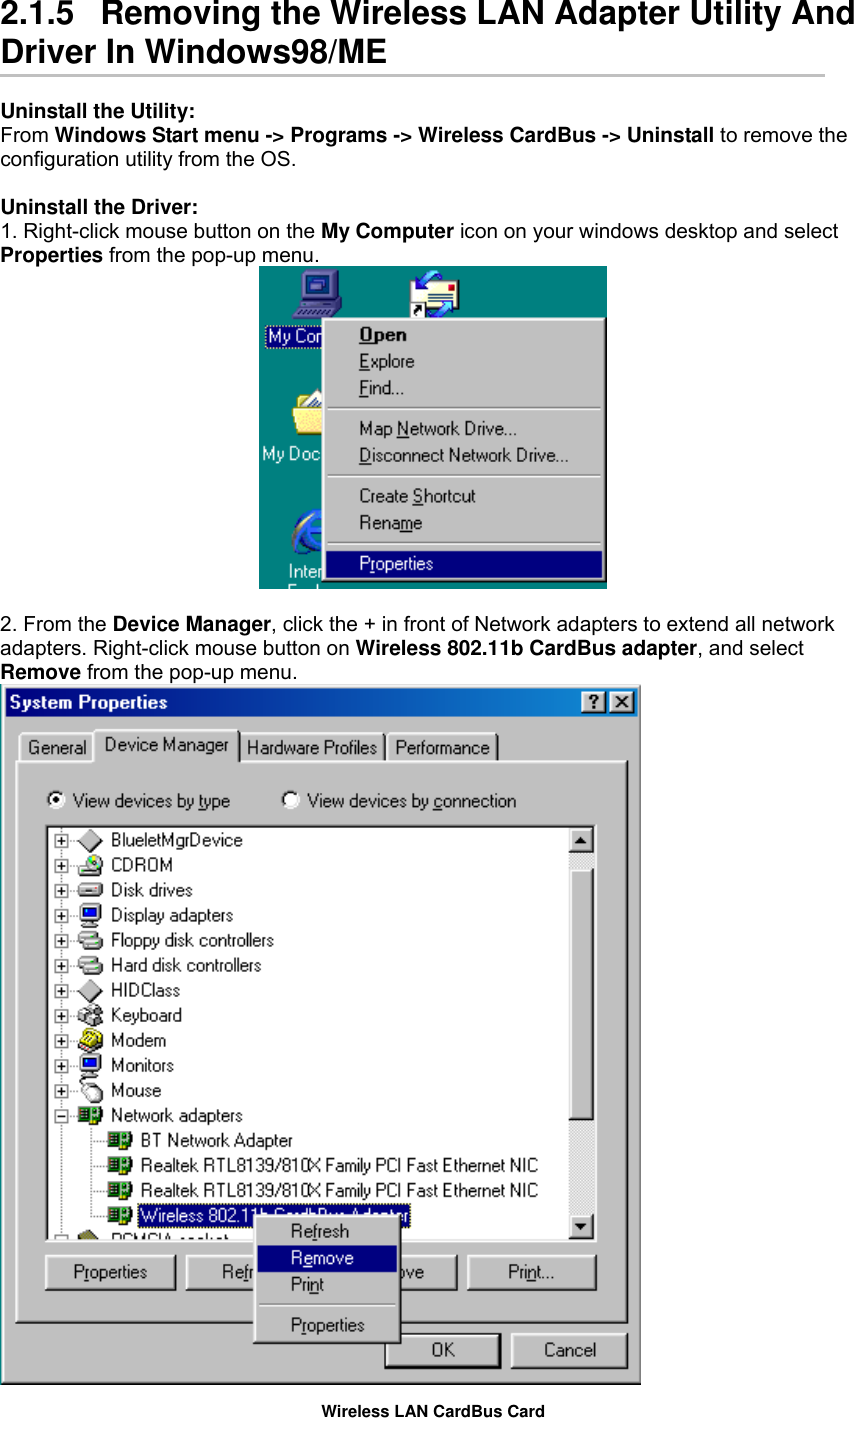  2.1.5   Removing the Wireless LAN Adapter Utility And Driver In Windows98/ME  Uninstall the Utility: From Windows Start menu -&gt; Programs -&gt; Wireless CardBus -&gt; Uninstall to remove the configuration utility from the OS.  Uninstall the Driver: 1. Right-click mouse button on the My Computer icon on your windows desktop and select Properties from the pop-up menu.   2. From the Device Manager, click the + in front of Network adapters to extend all network adapters. Right-click mouse button on Wireless 802.11b CardBus adapter, and select Remove from the pop-up menu.  Wireless LAN CardBus Card 